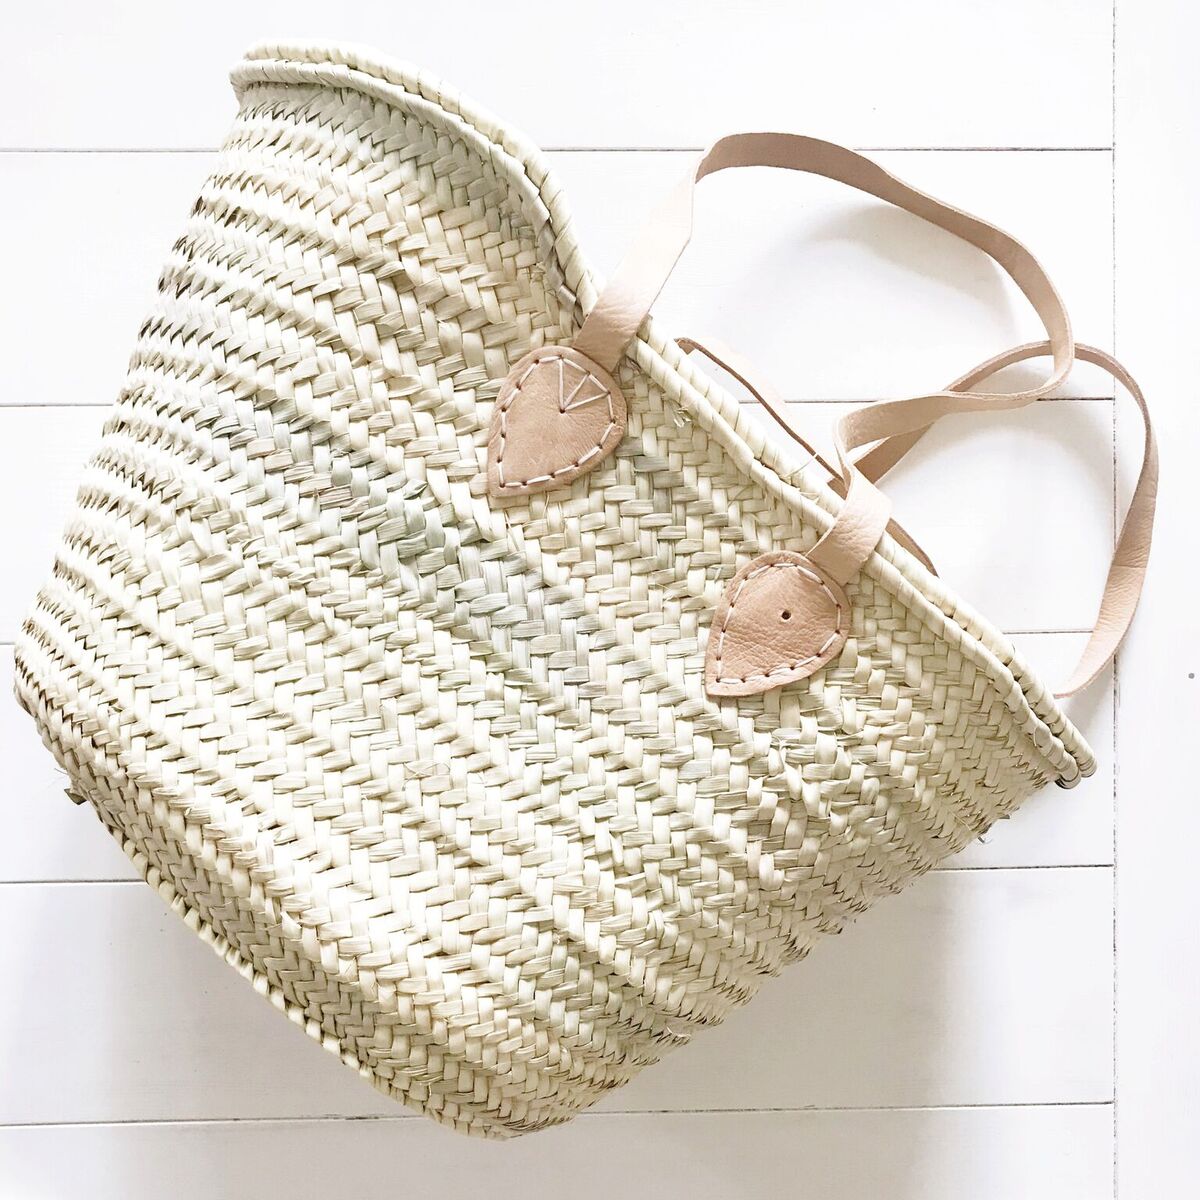 Gifts made with love for the foodie on your list! Like this perfect straw market basket bag.